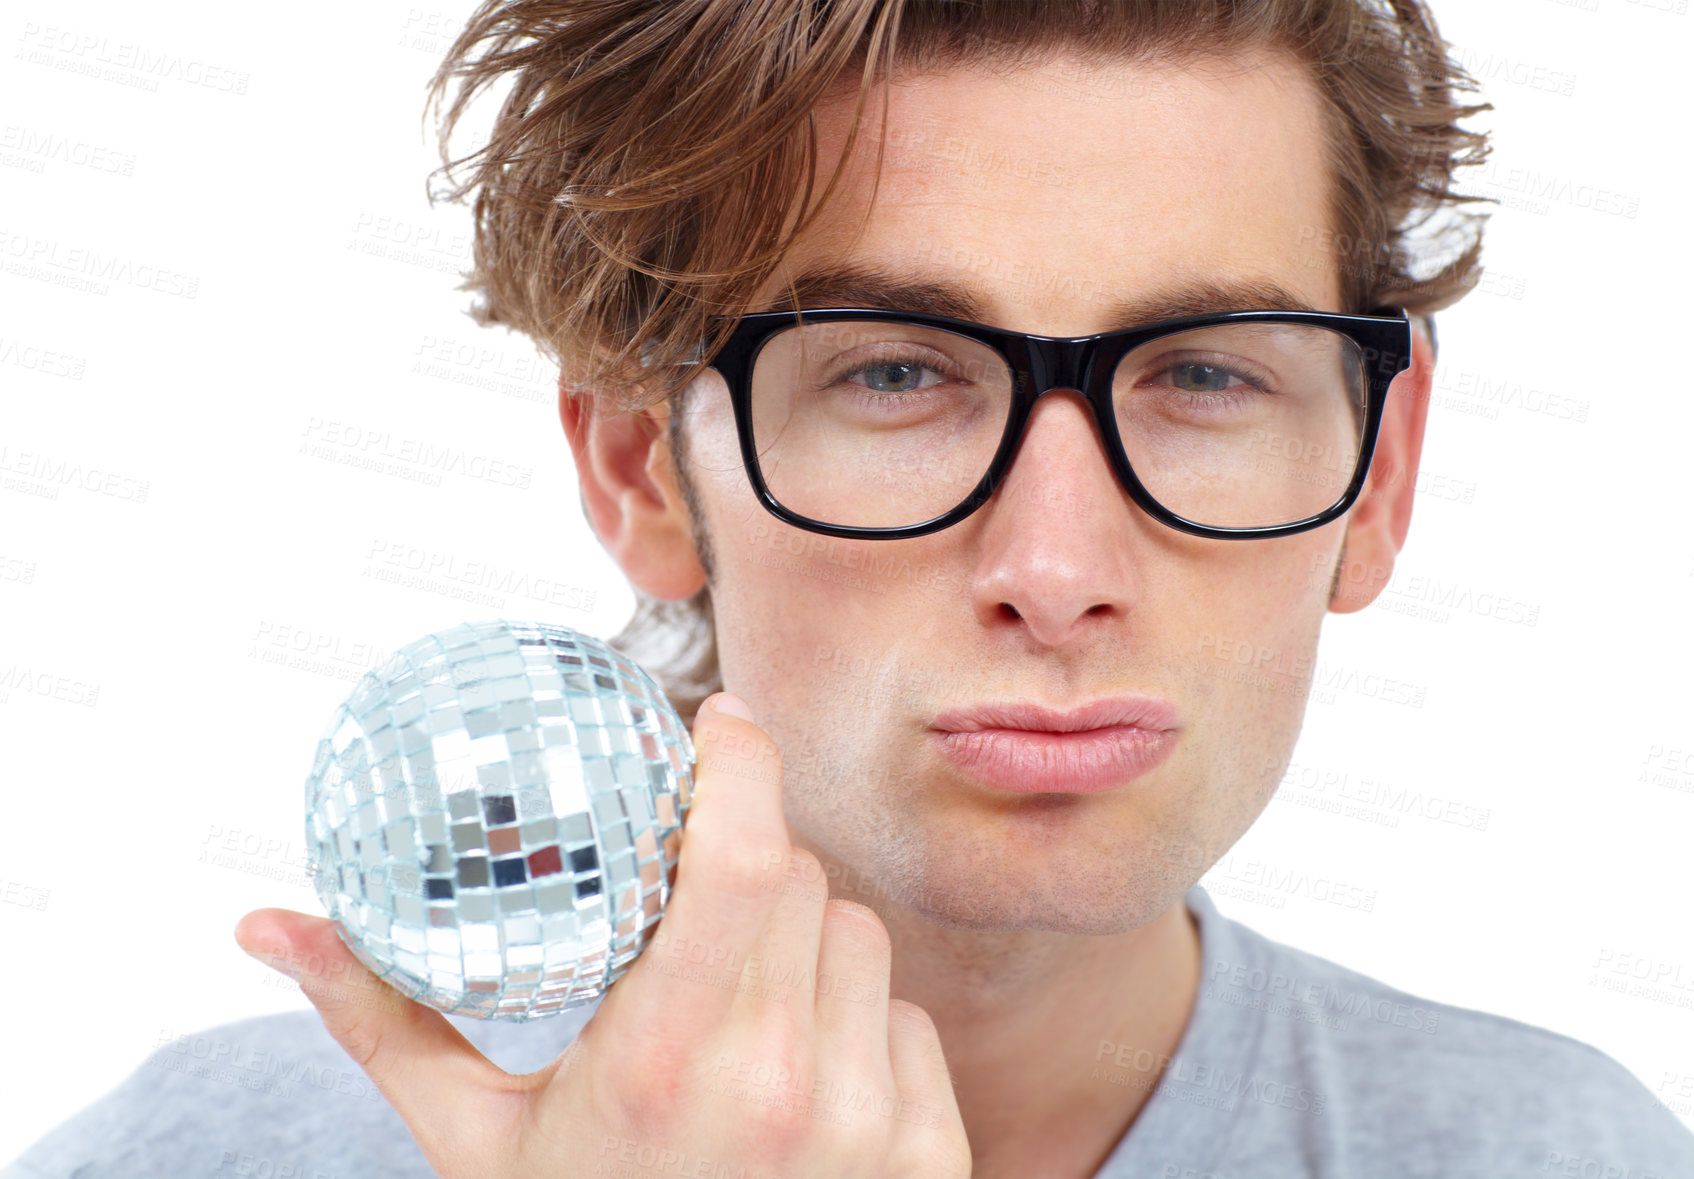 Buy stock photo Handsome young man pouting and holding a small disco ball